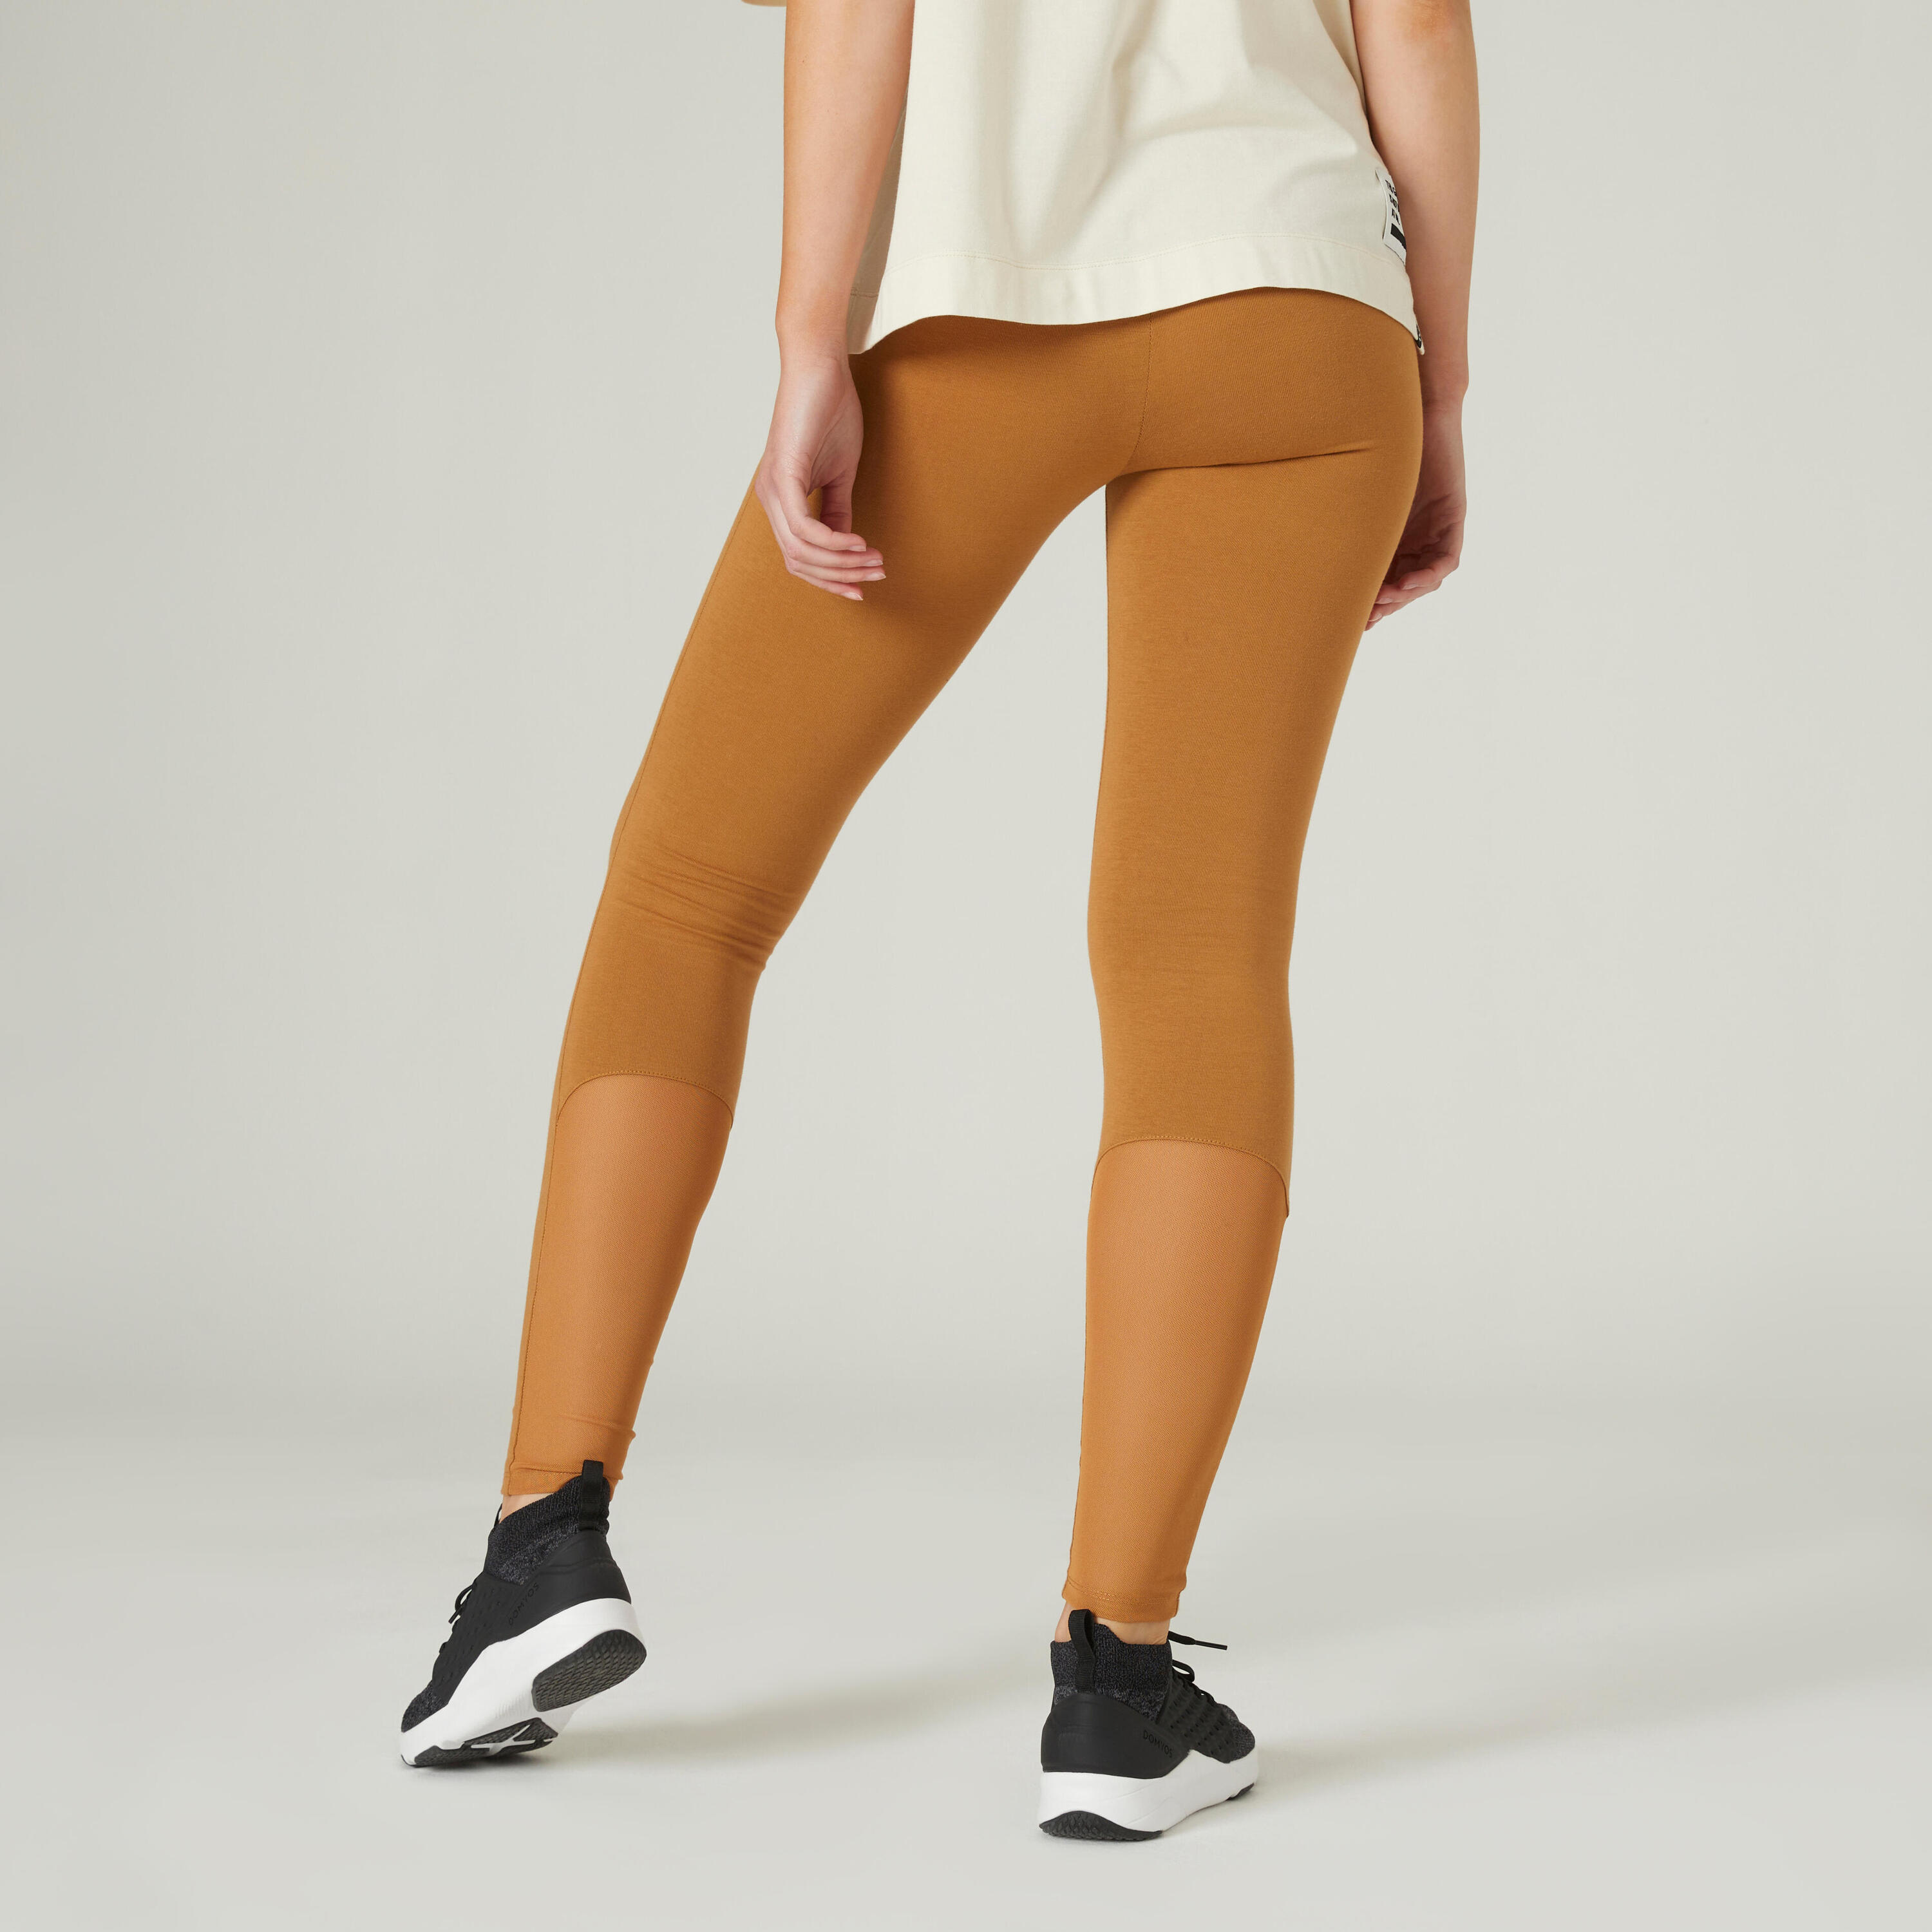 Stretchy High-Waisted Cotton Fitness Leggings with Mesh - Hazelnut 2/7